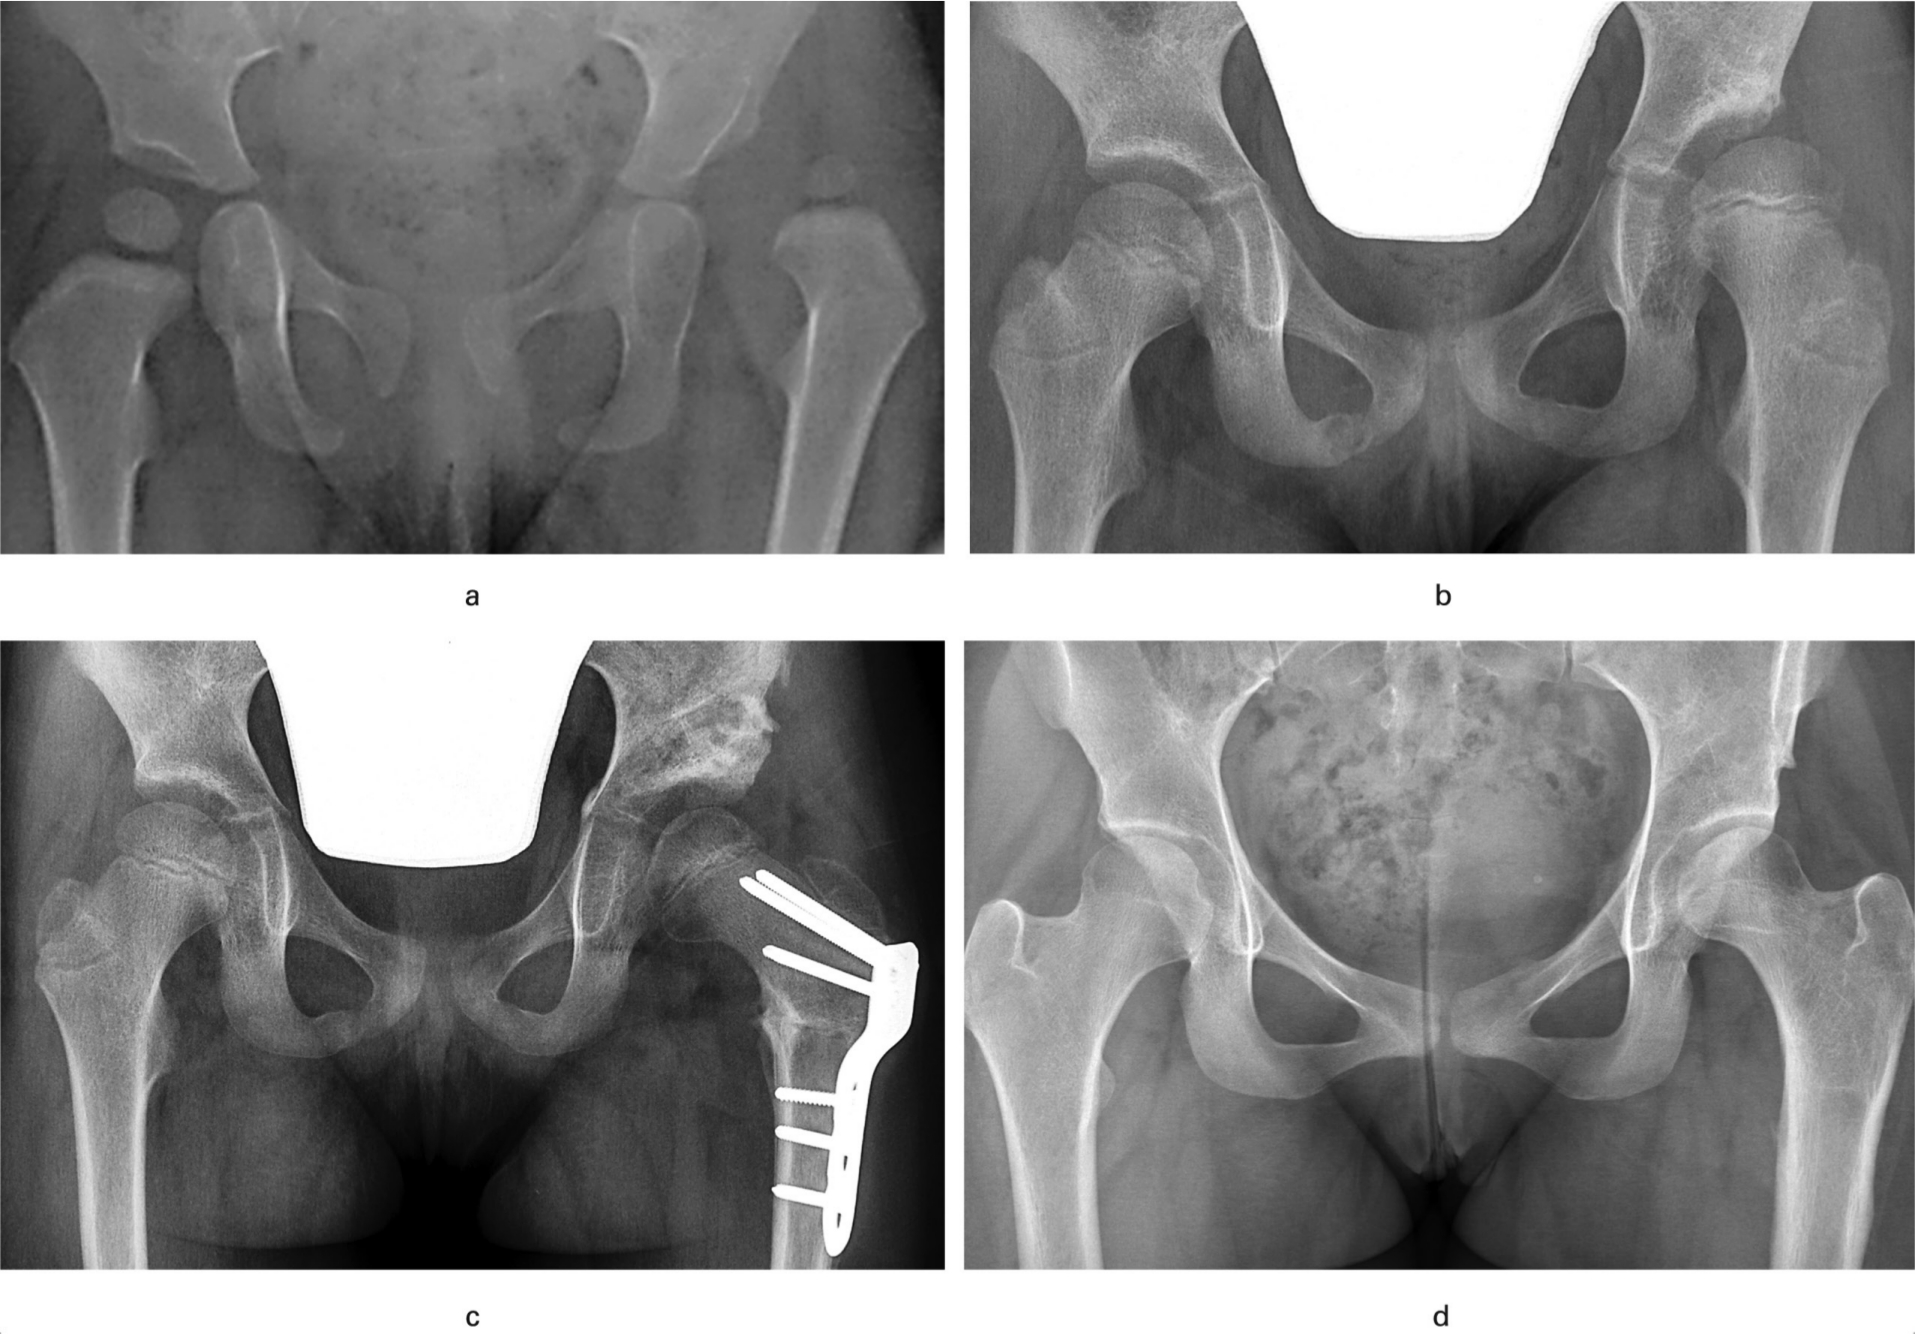 Figure 2 
          a) Primary radiograph of a girl with dislocation of her left hip, with acetabular index 23° of the right hip and 40° of the left. Closed reduction was performed at an age of 19 months. b) Radiograph at an age of six years, showing residual dysplasia with subluxation of the left hip (CE angle 9°). Dega type pelvic osteotomy and femoral varus osteotomy with shortening were performed. c) Radiograph six weeks postoperatively showing good correction of the left hip. d) Radiograph at the last follow-up at an age of 17 years, showing adequate femoral head coverage (CE angle of left hip 21°).
        